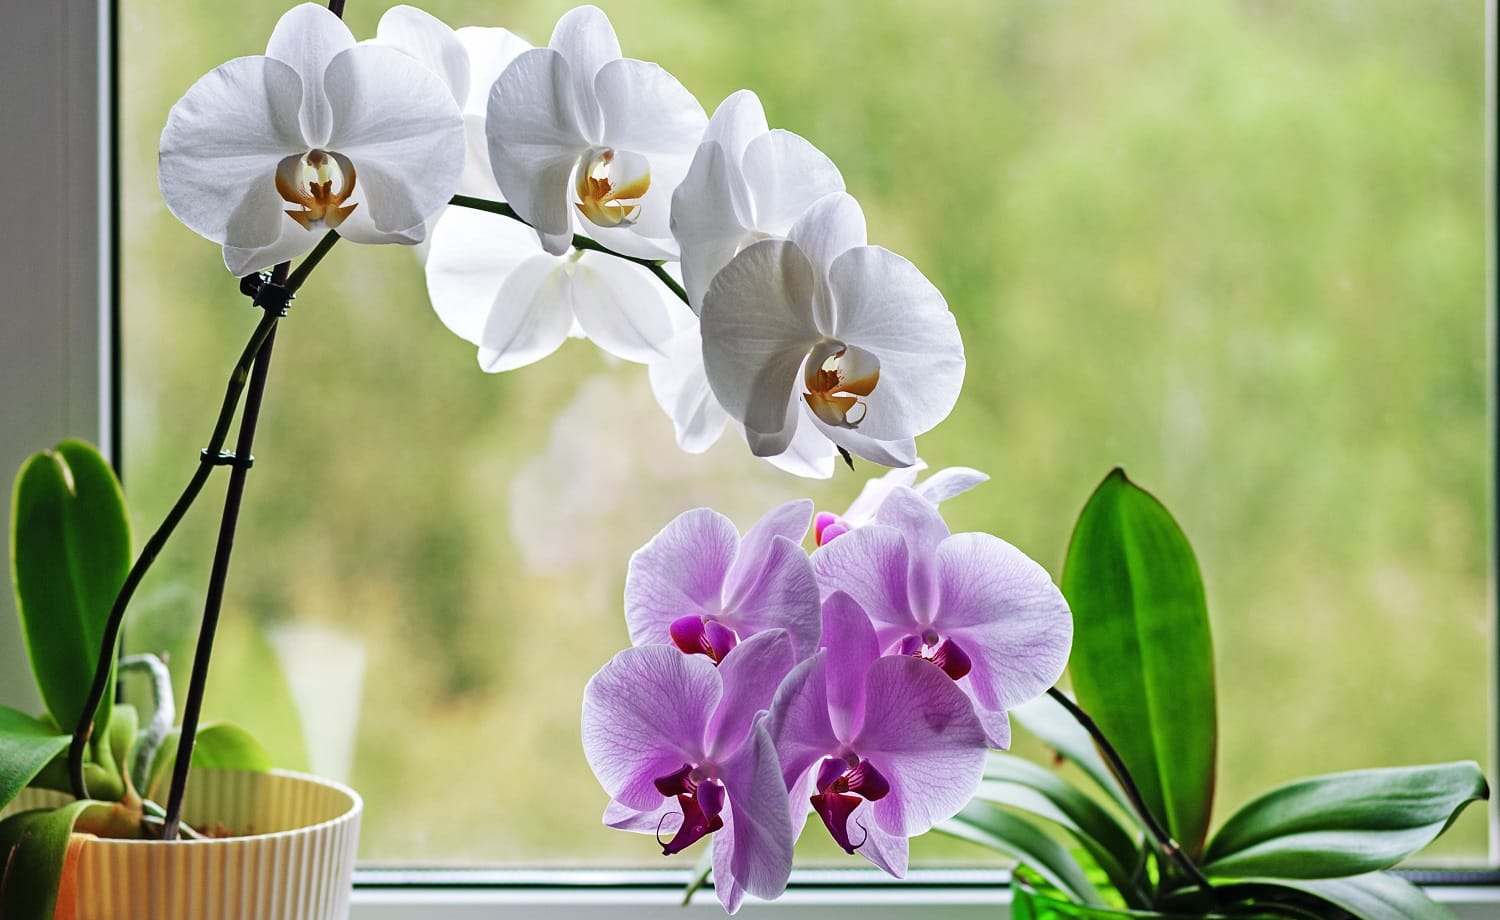 orchids blooming in flower pots on window sill